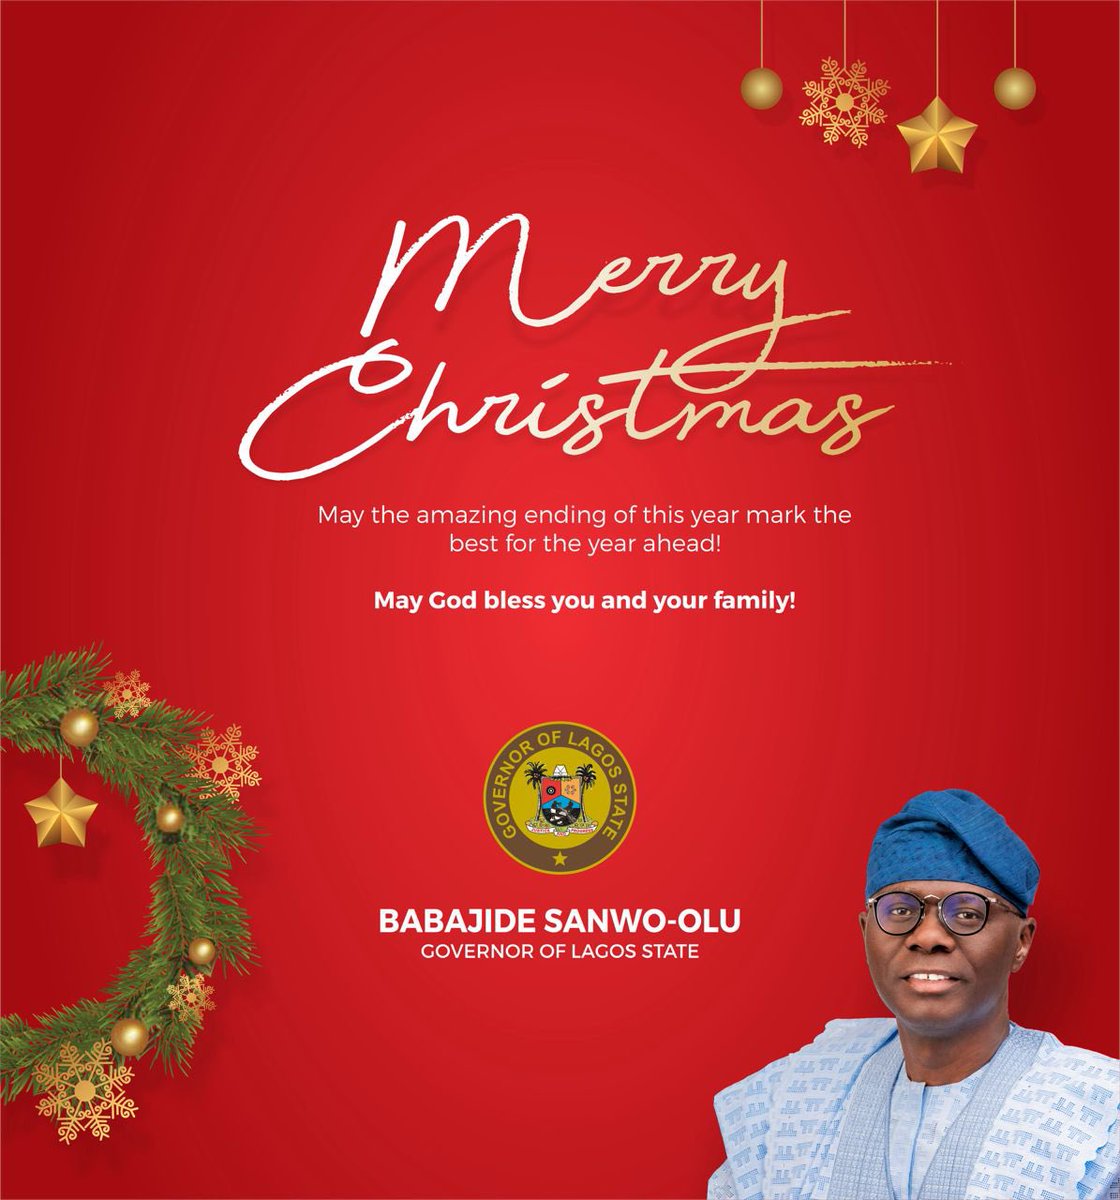 As we celebrate Christmas, I extend my warmest wishes to every Lagosian and Nigerian, especially Christians. Let's remember the true essence of this season - reflecting on the birth of Jesus and spreading kindness and generosity. This Christmas, I urge everyone to live in…